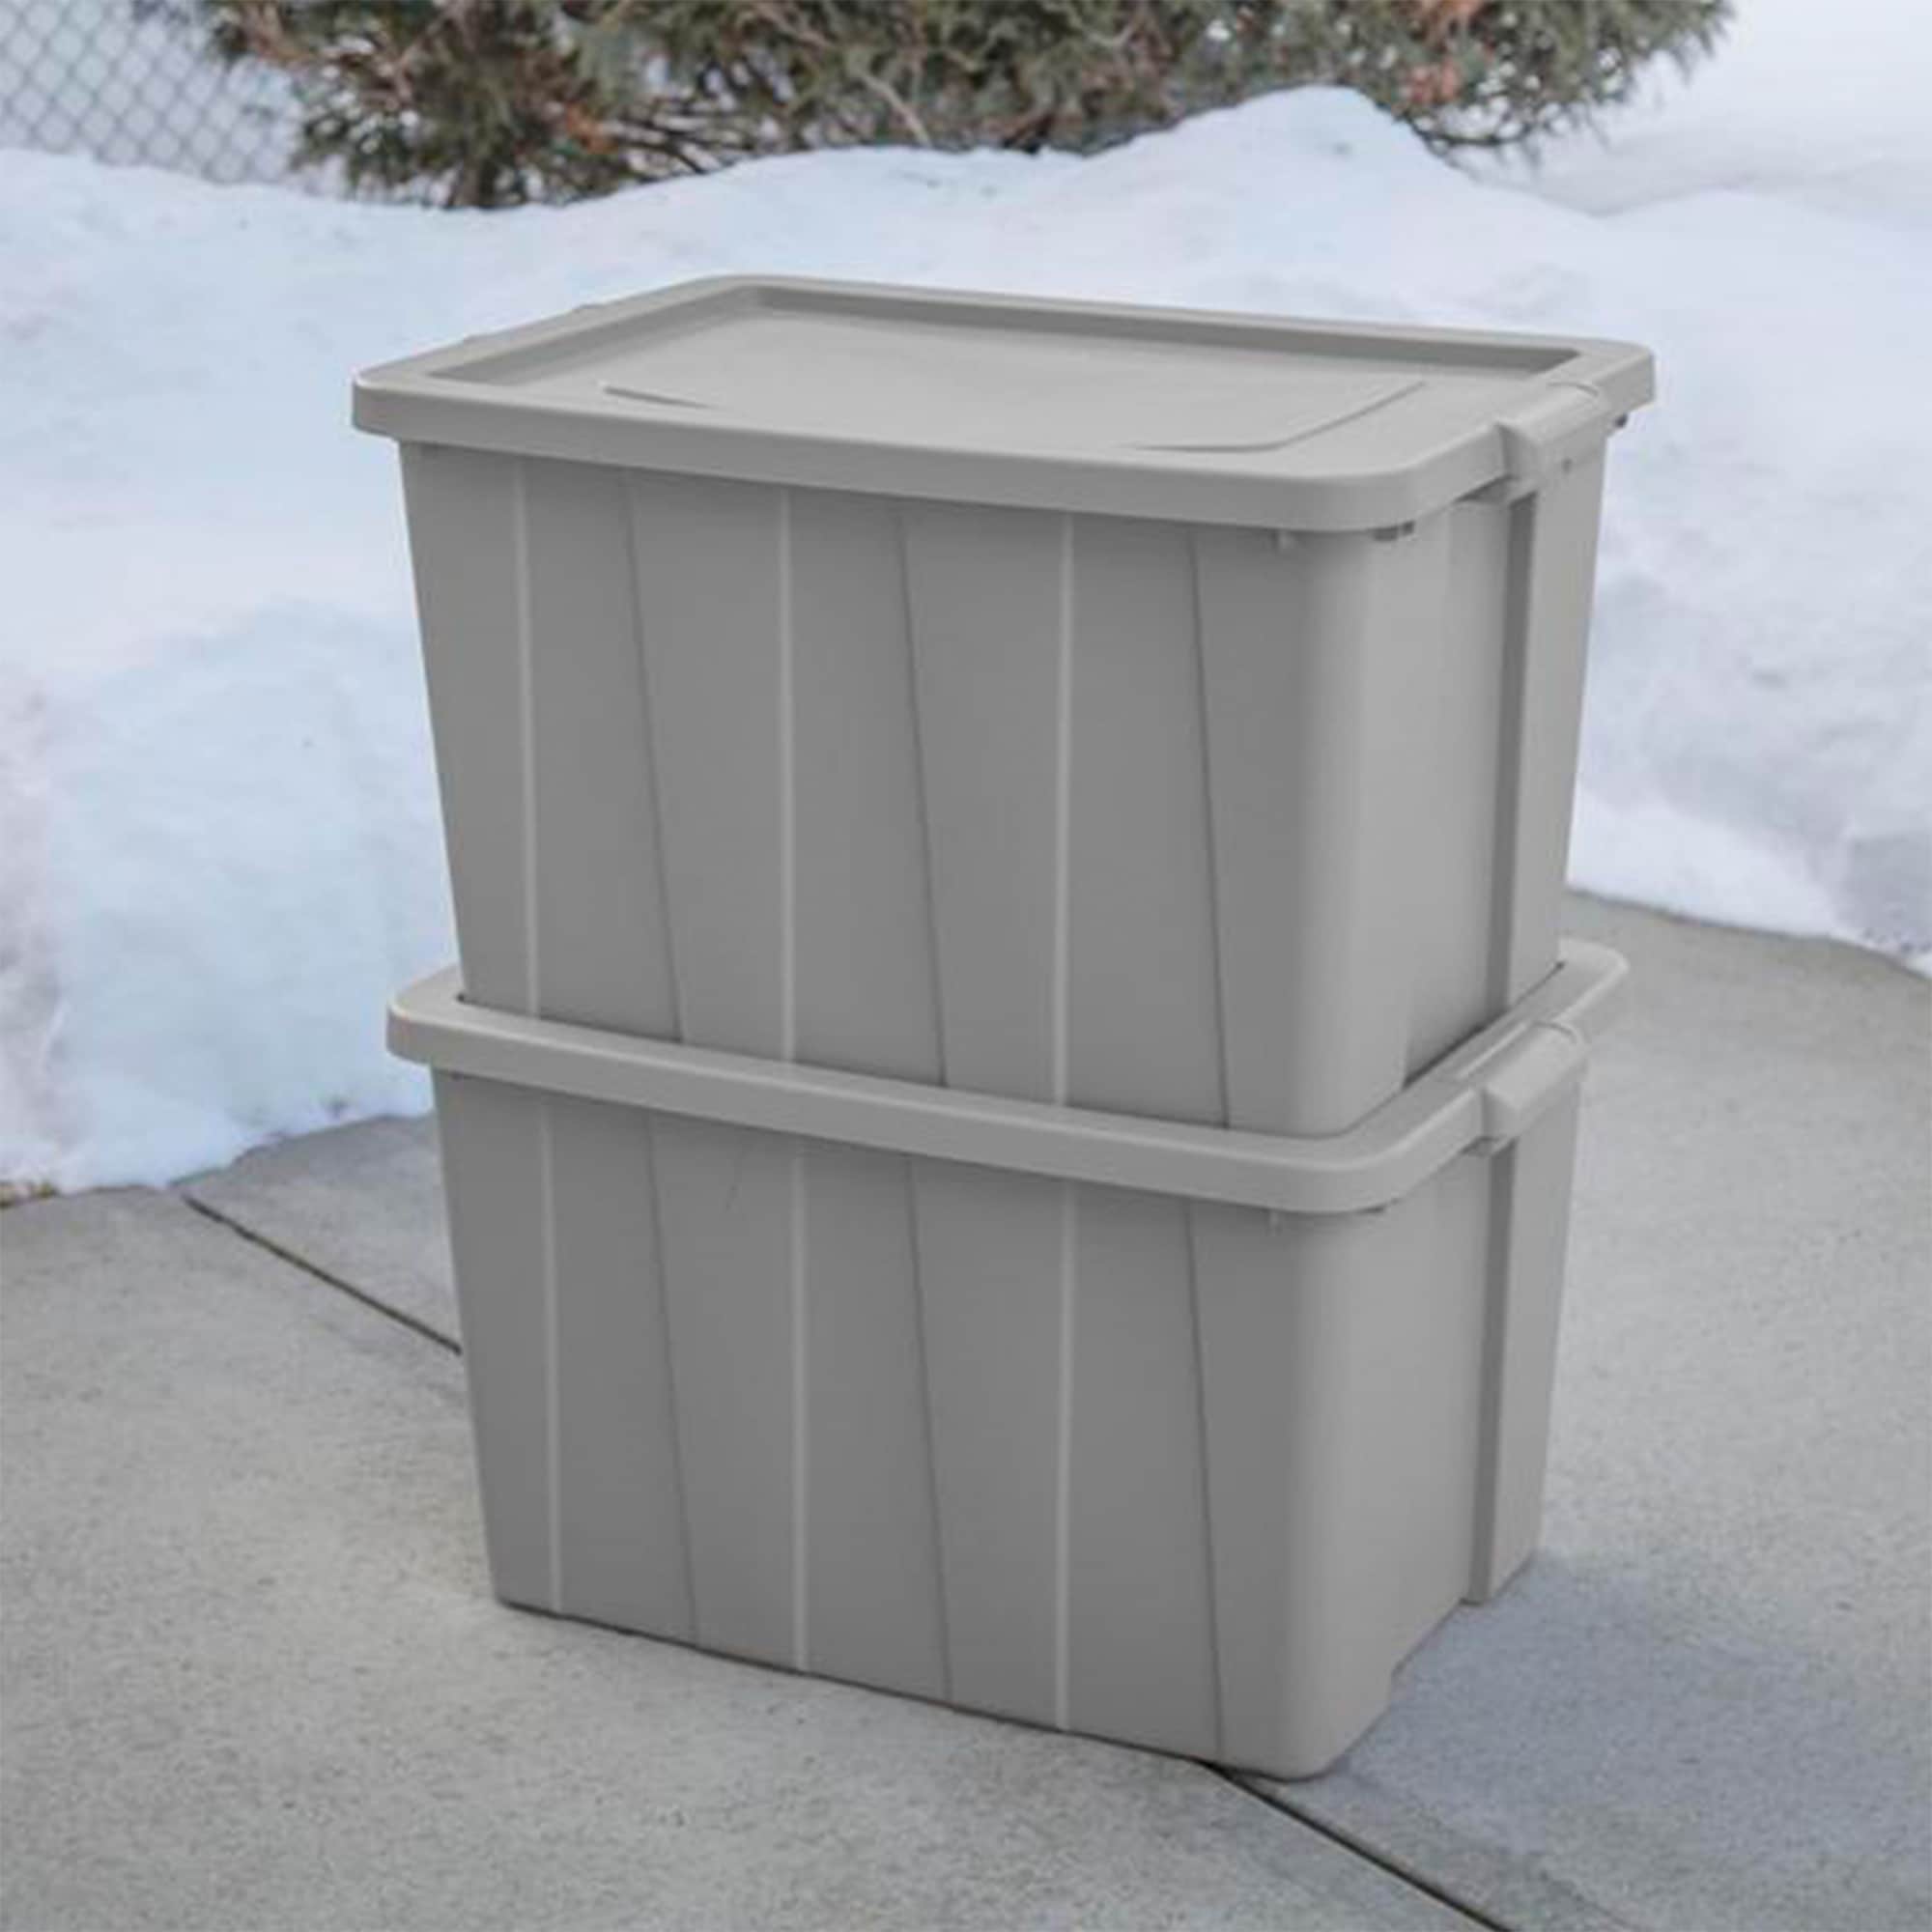 https://ak1.ostkcdn.com/images/products/is/images/direct/1c9c901d423d9d94b7fe91b64eb4442c6a9d4ff7/Sterilite-Tuff1-30-Gallon-Plastic-Storage-Tote-Container-Bin-with-Lid-%288-Pack%29.jpg